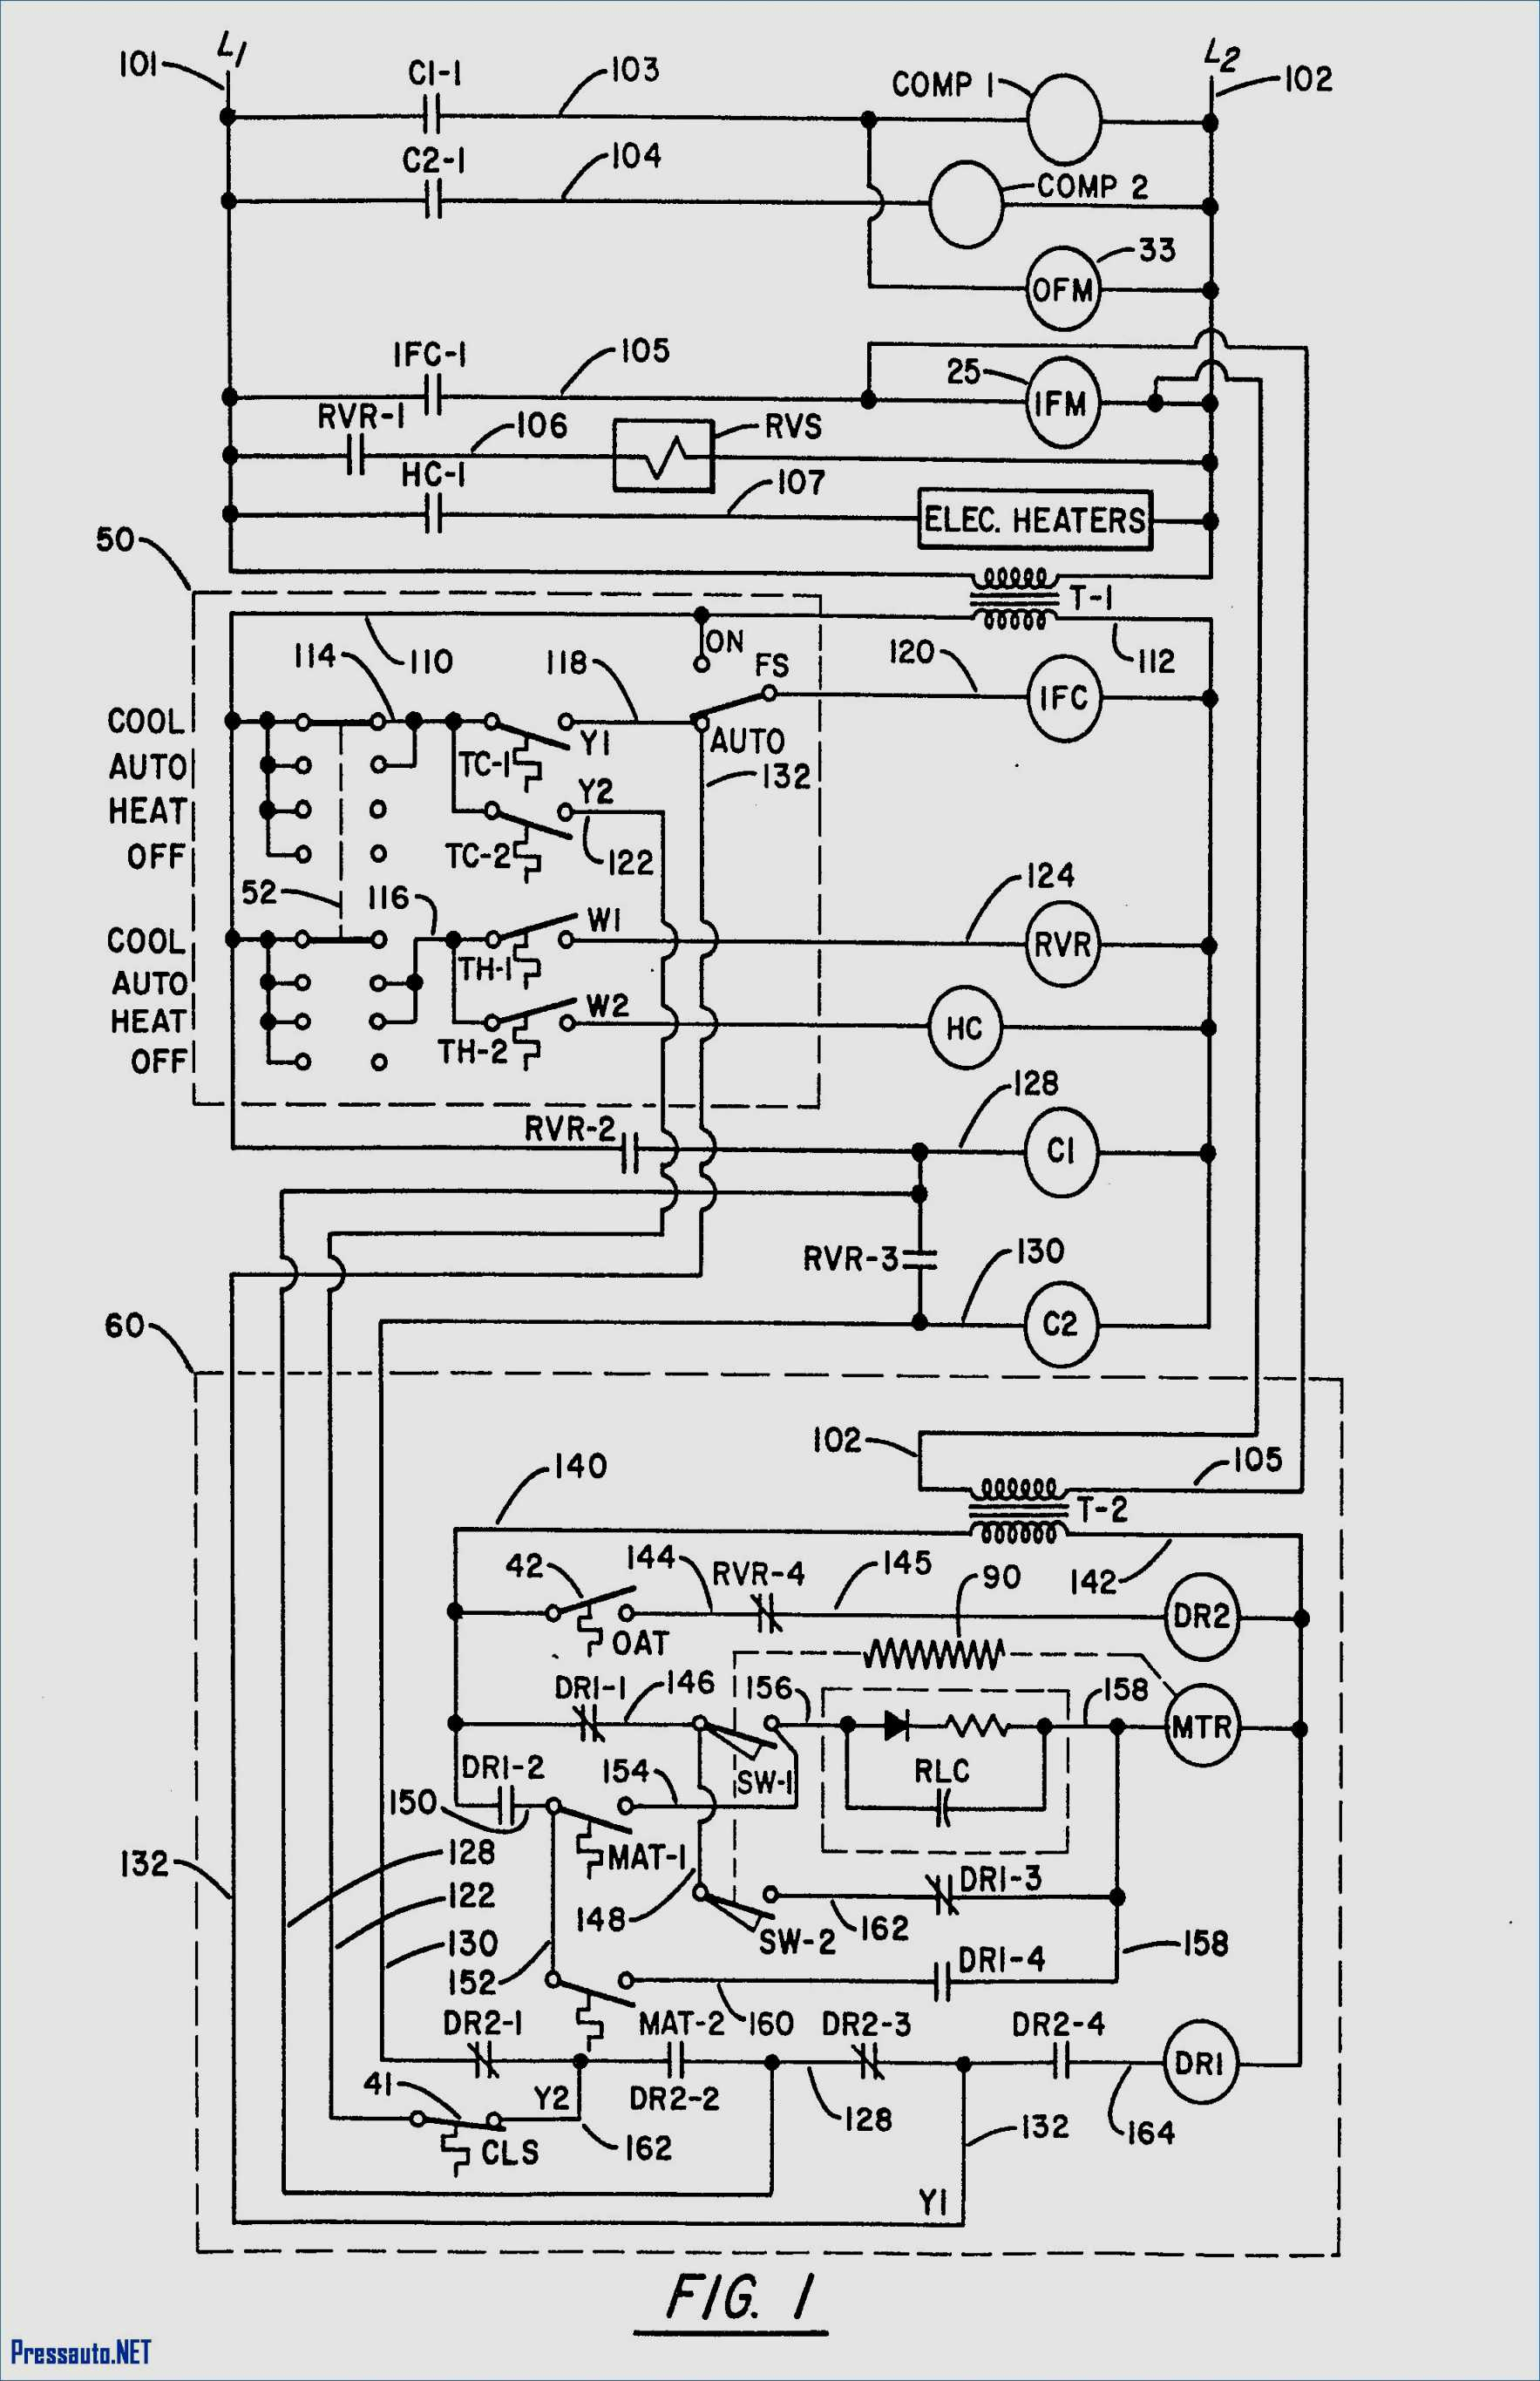 Carrier Air Conditioner Wiring Diagram - Carrier Air Conditioner Wiring Diagram